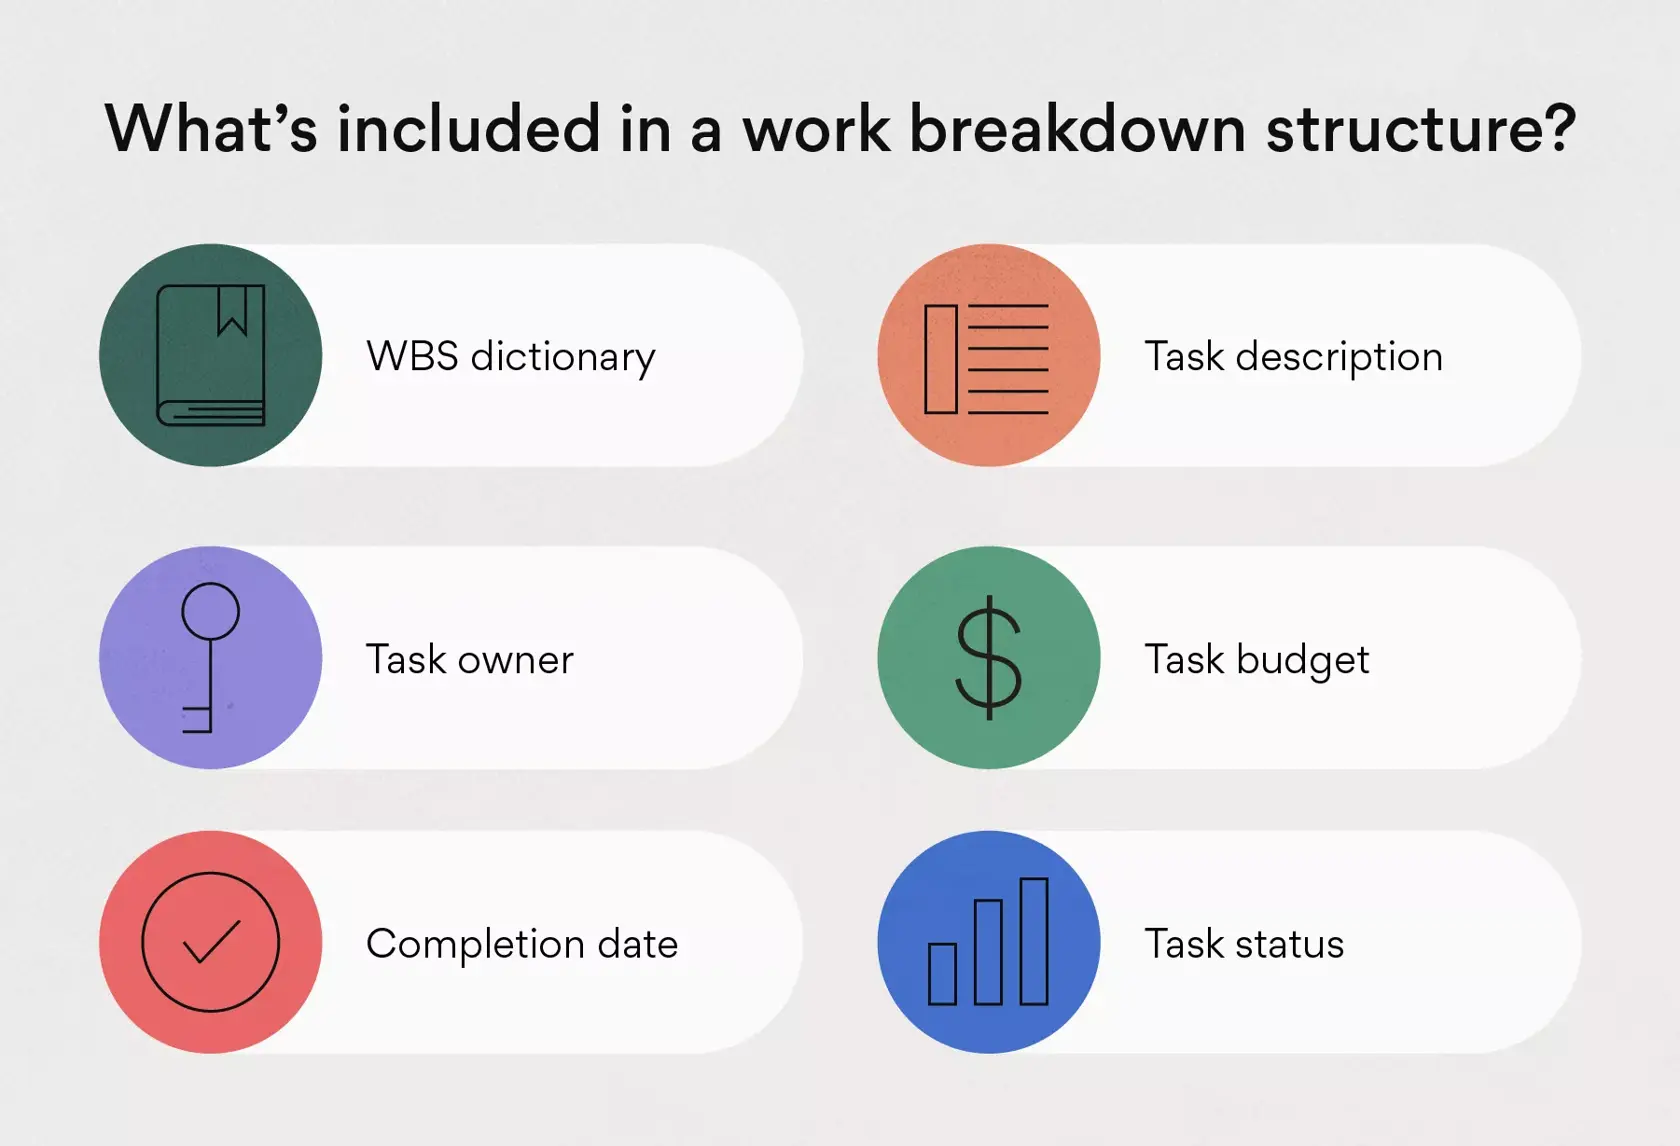 What's included in a work breakdown structure